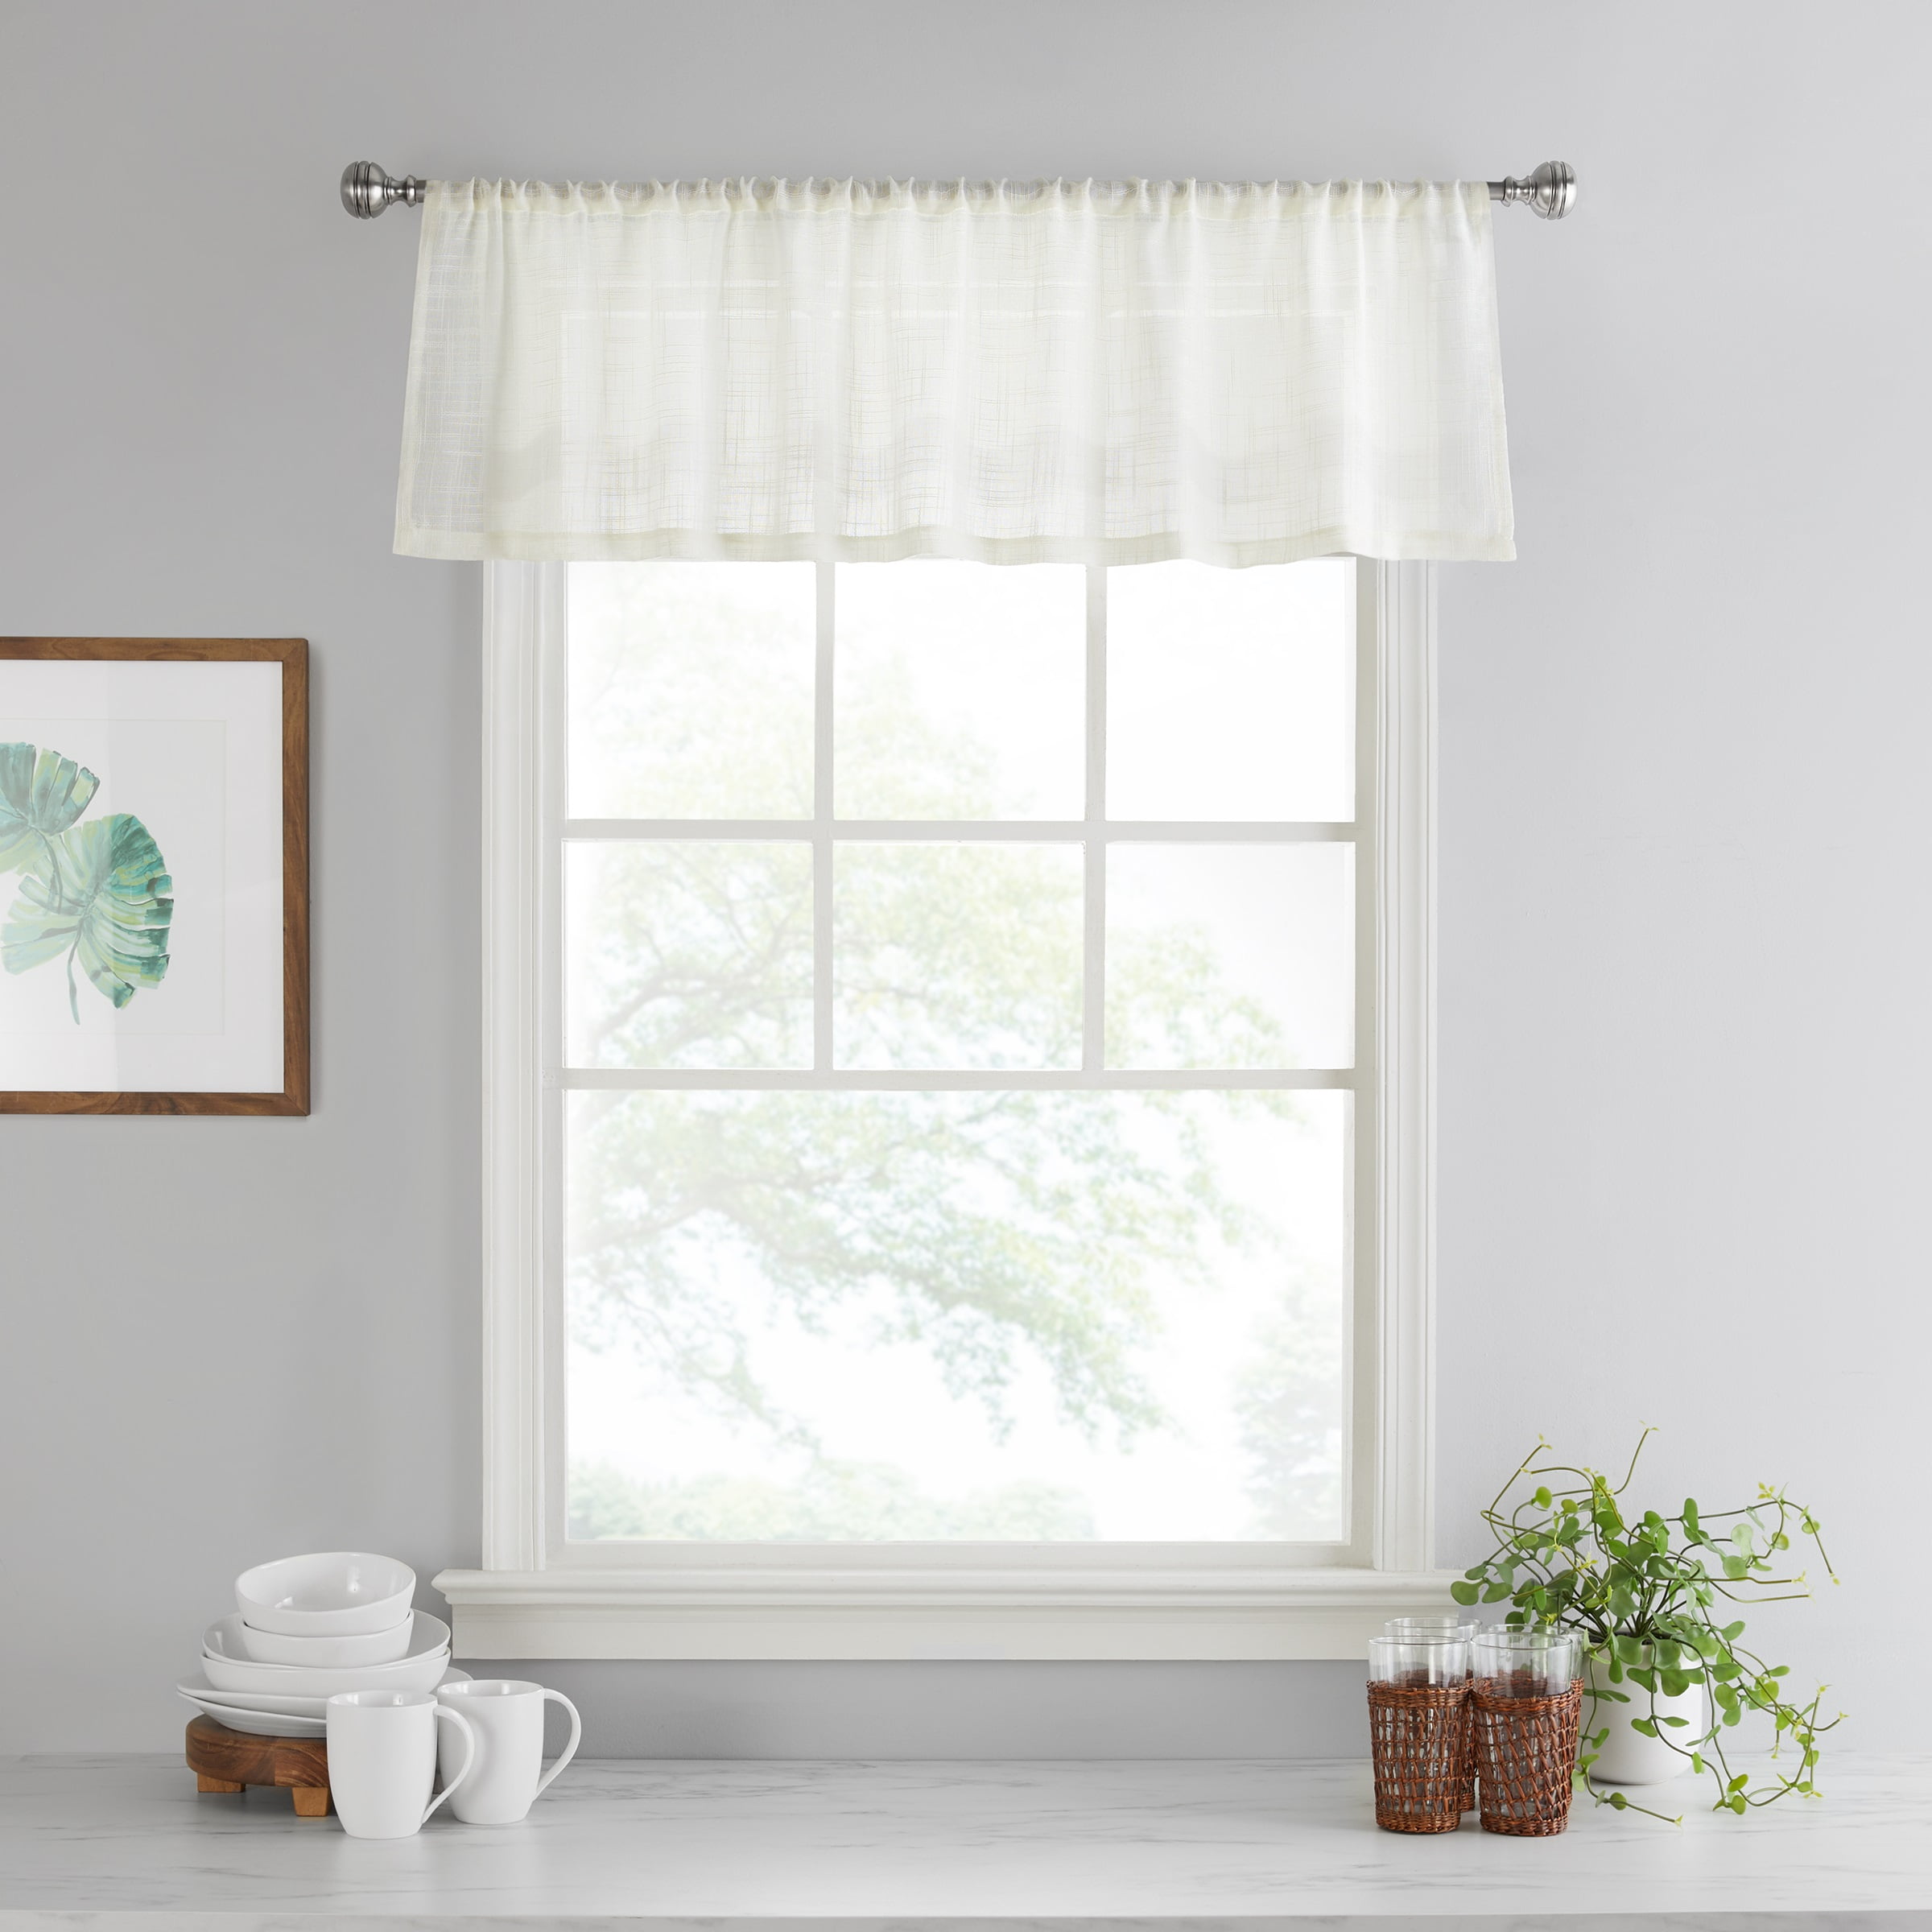 NEW Color Choices Leaf Vines 3 Piece Tailored Window Valance/Tier Sets Modern 